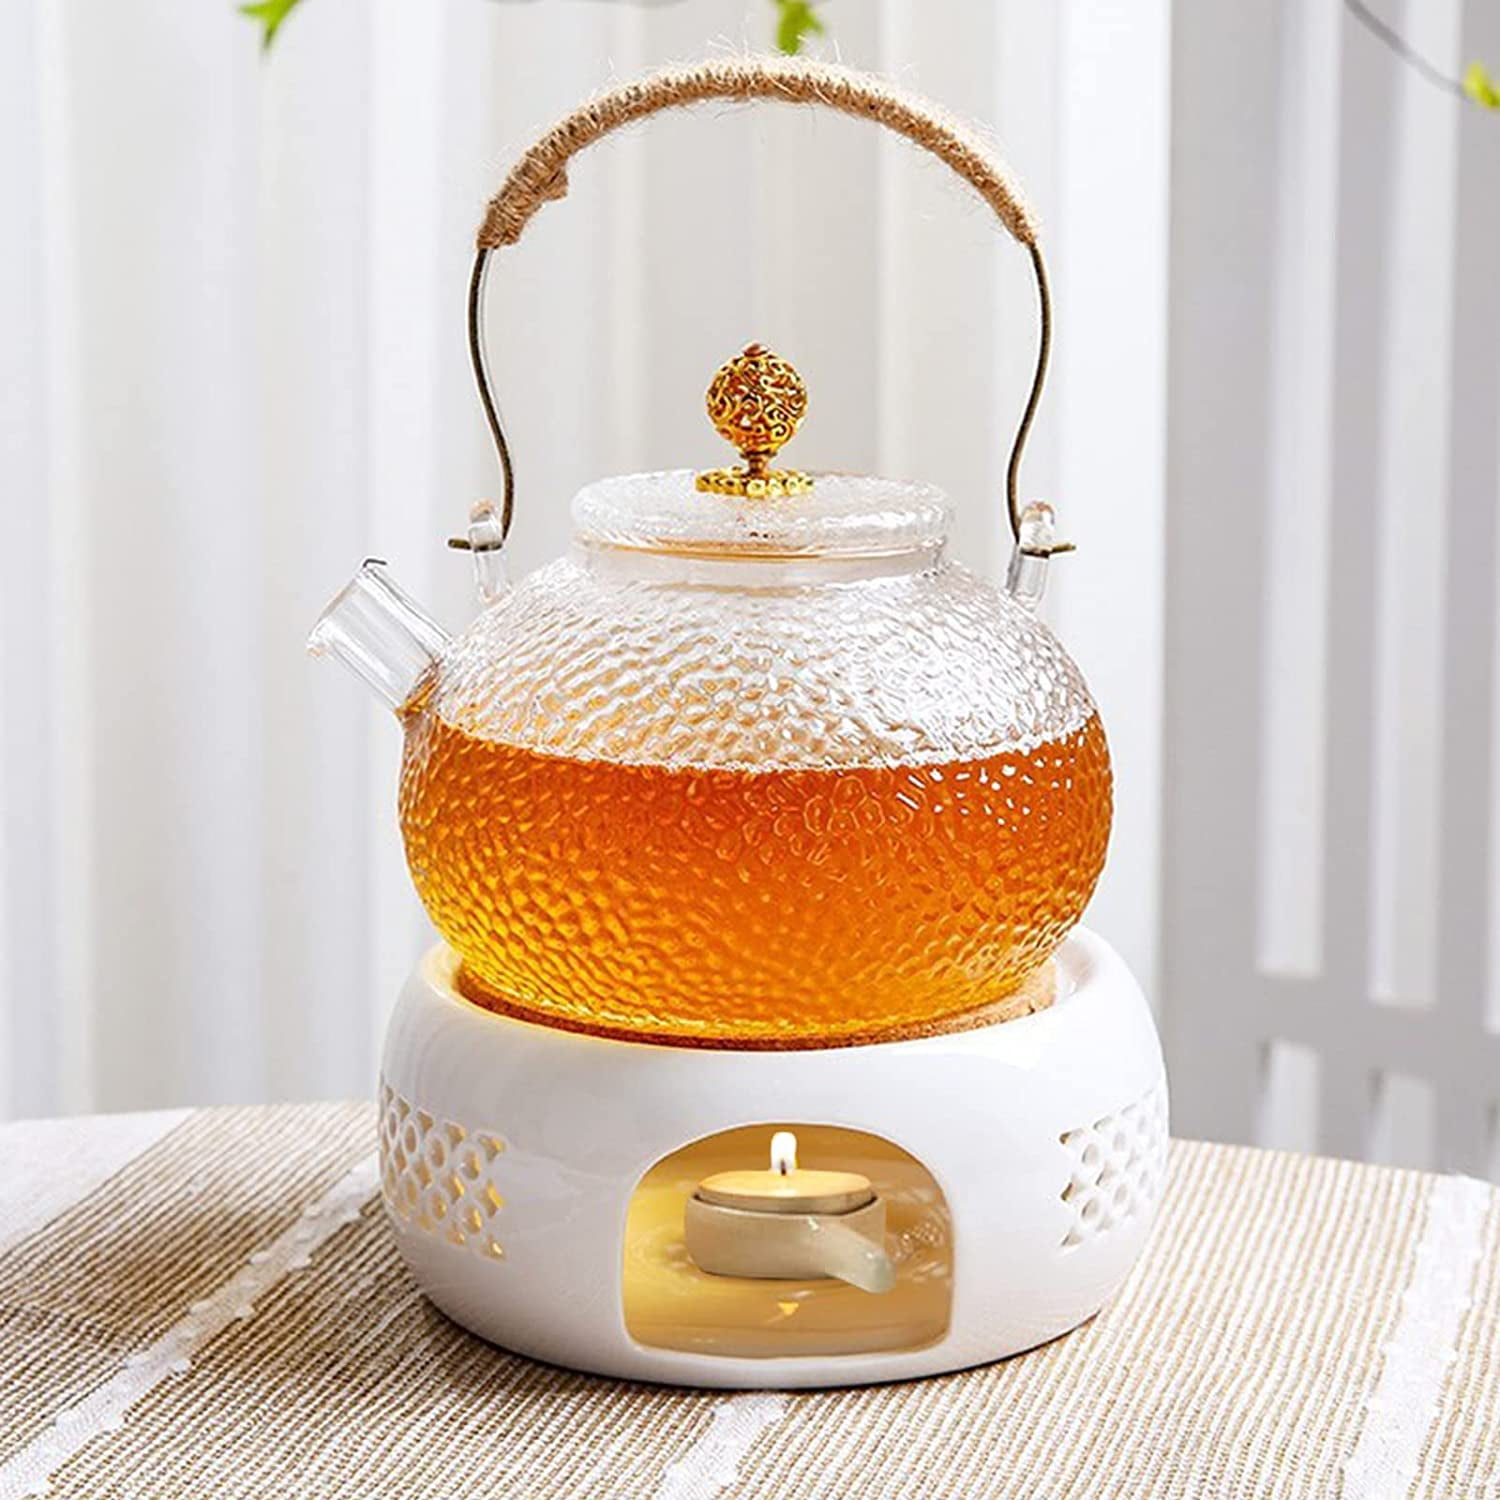 Teapot Warmer Made Of Stainless Steel Hollow Carved Design